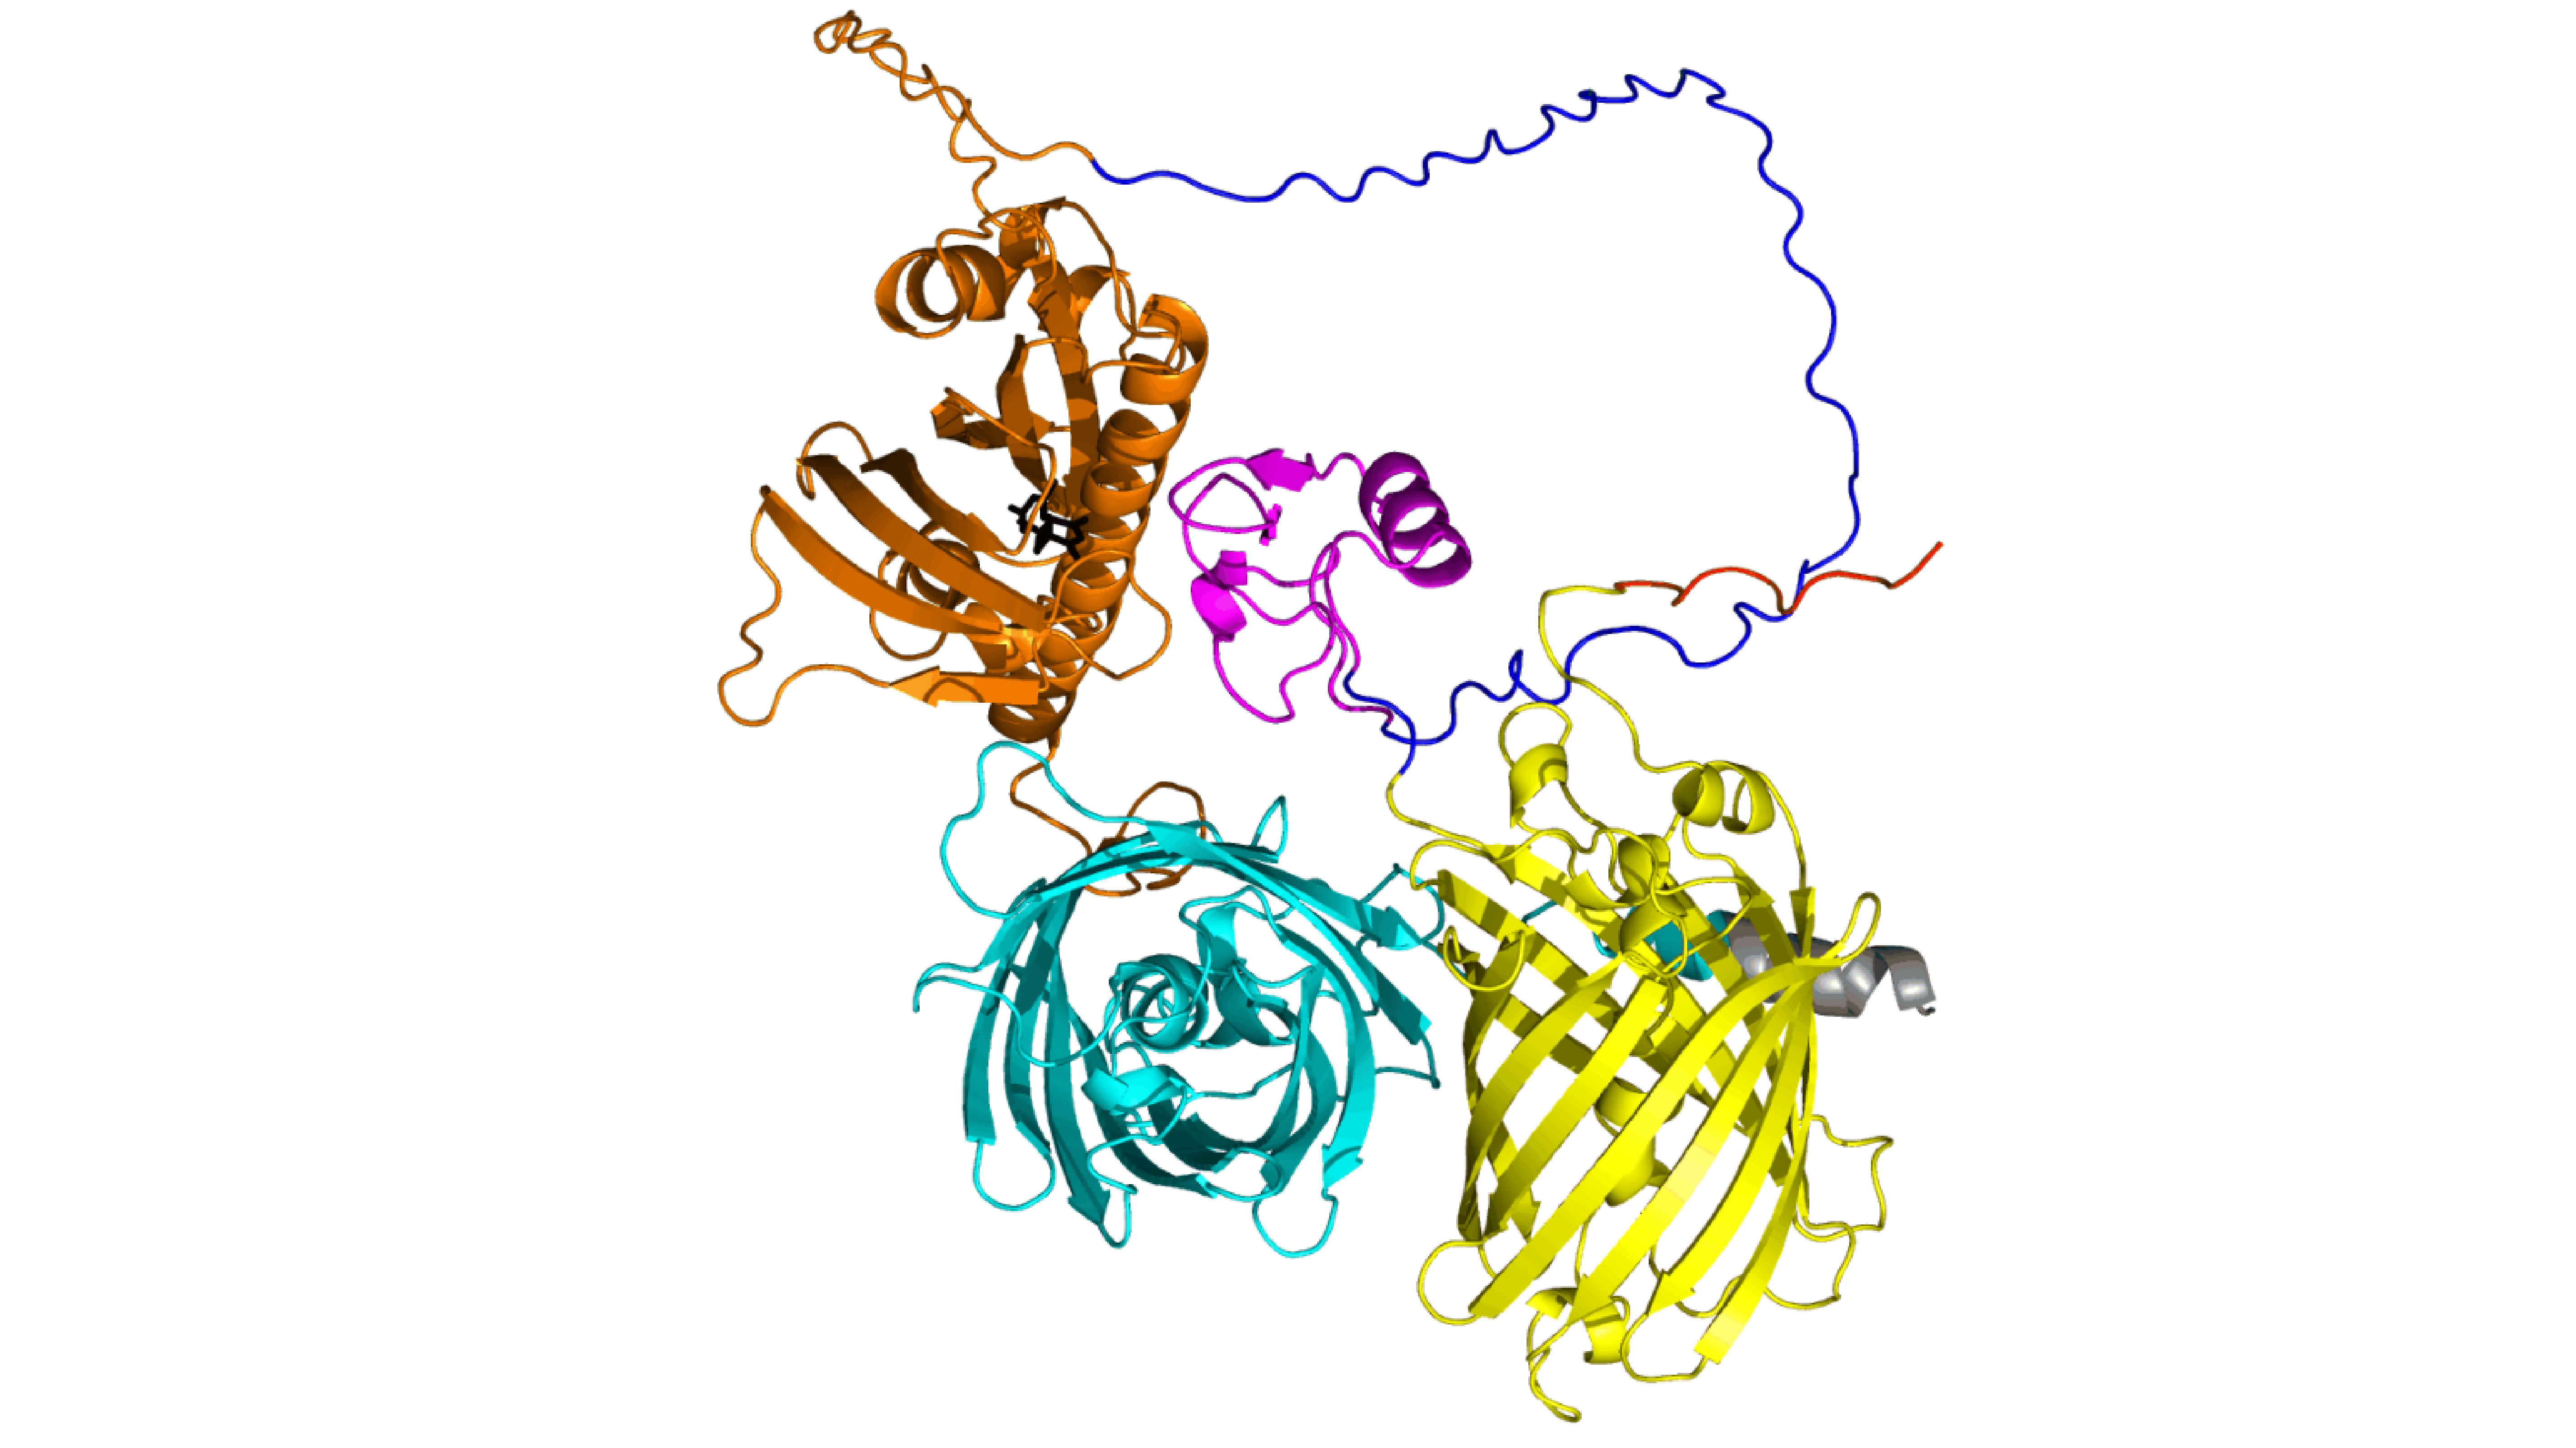 A protein structure model of the ABACUS2 biosensor made by the Jones lab to detect the plant hormone ABA